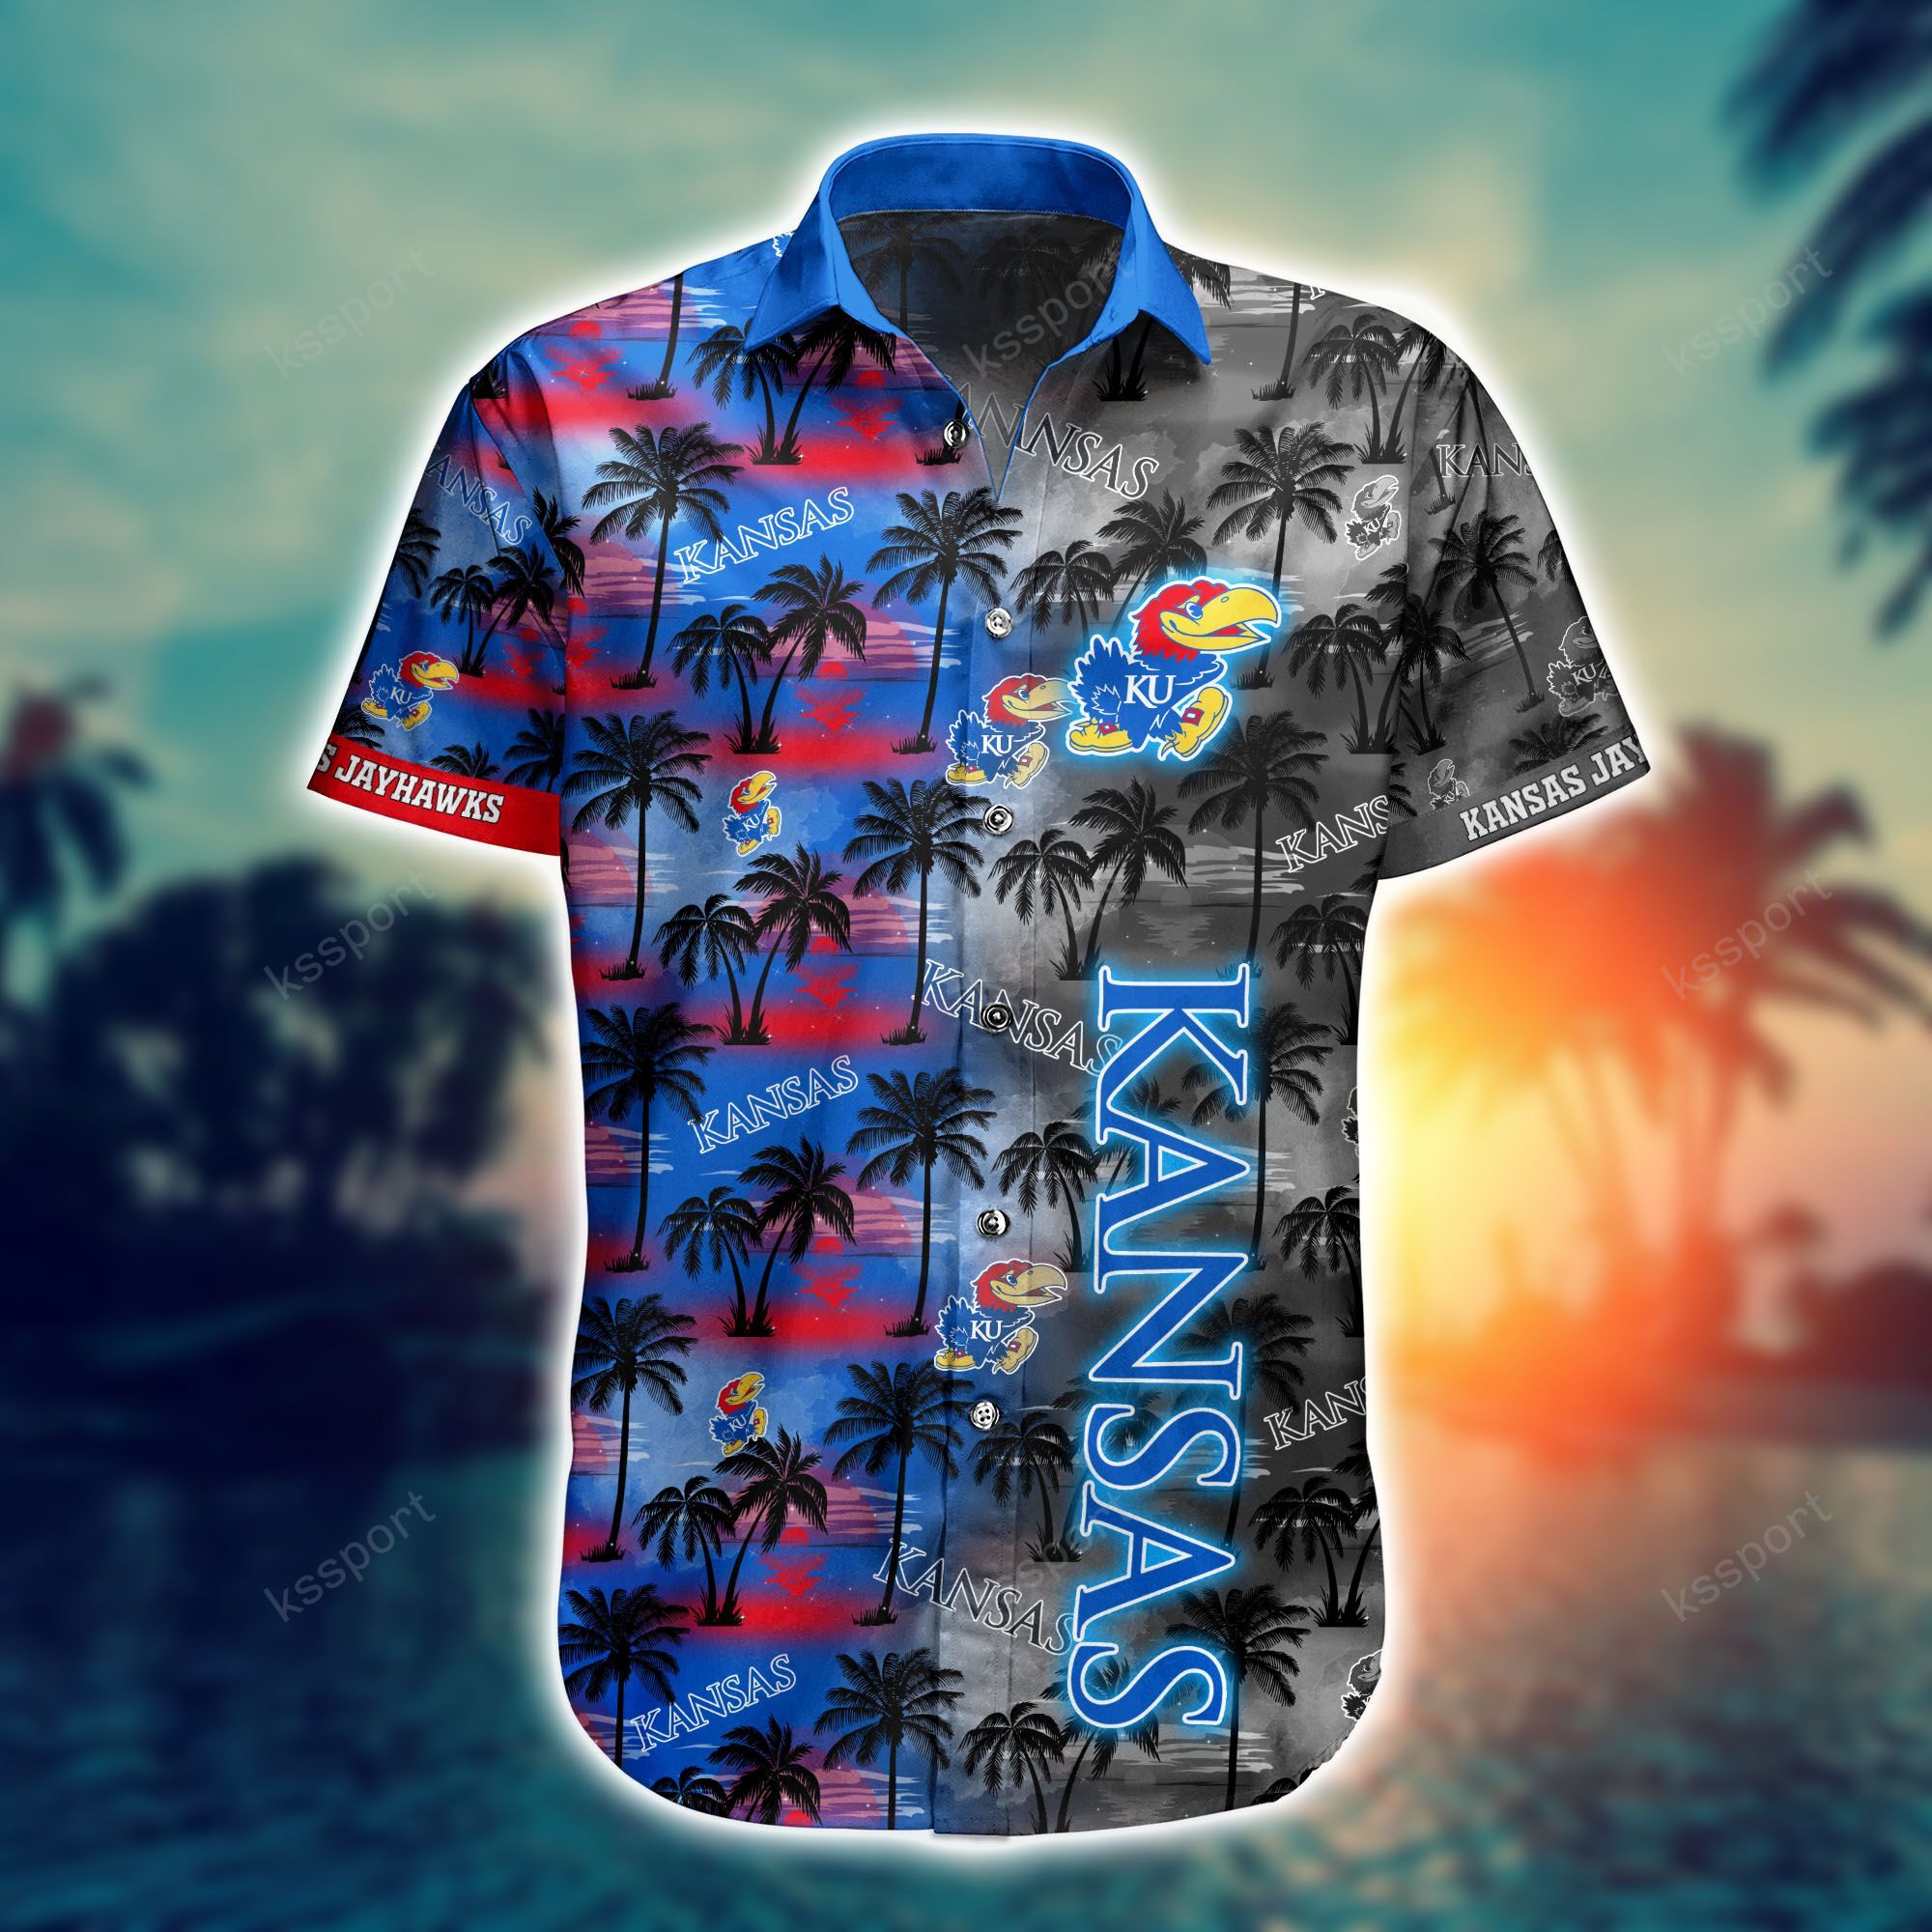 Top cool Hawaiian shirt 2022 - Make sure you get yours today before they run out! 111